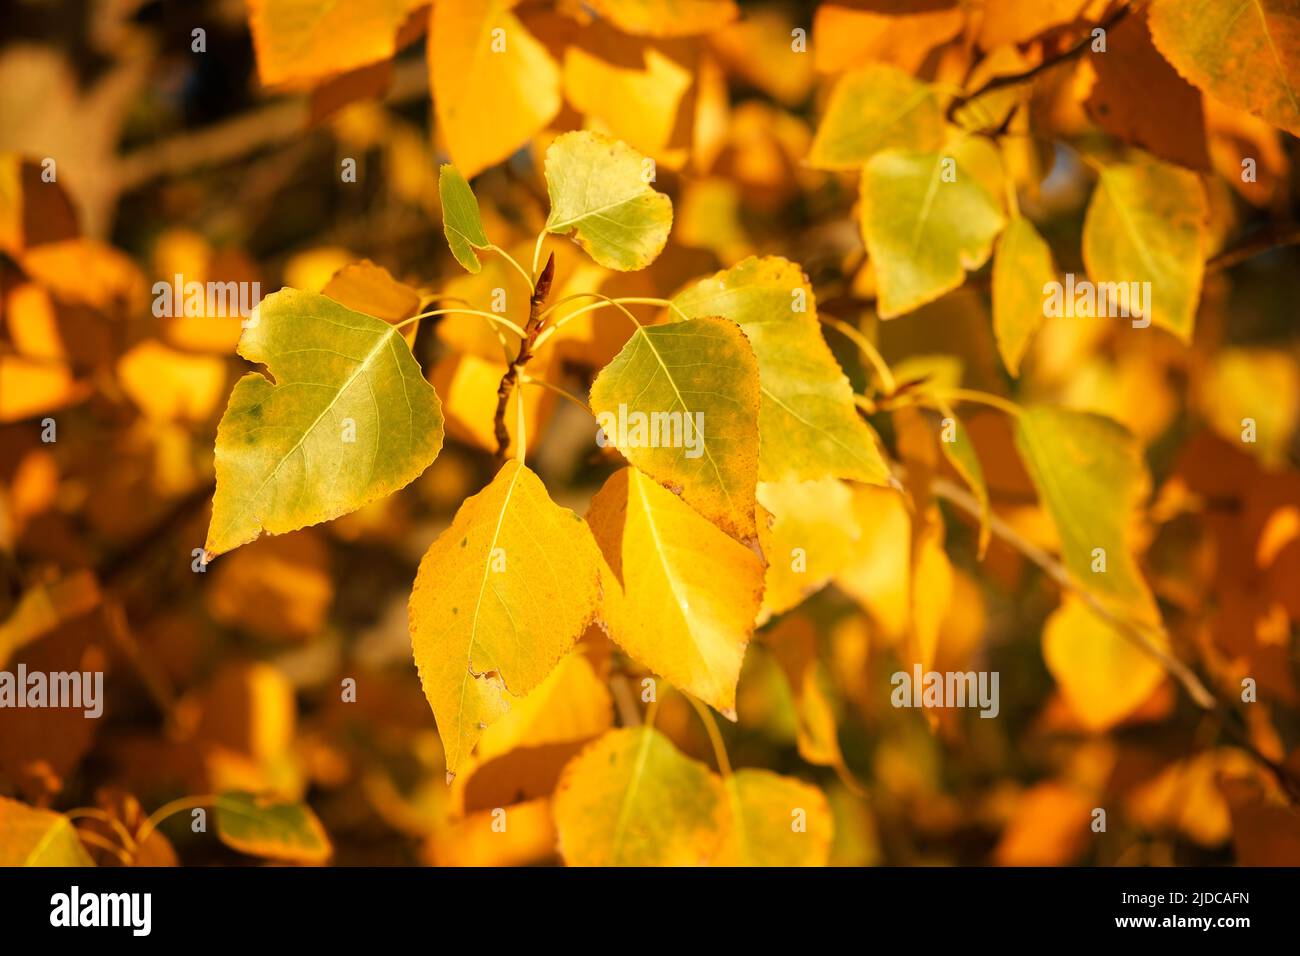 Closeup of a section of foliage on matchwood poplar tree turning from green foliage to bright golden yellow. Stock Photo